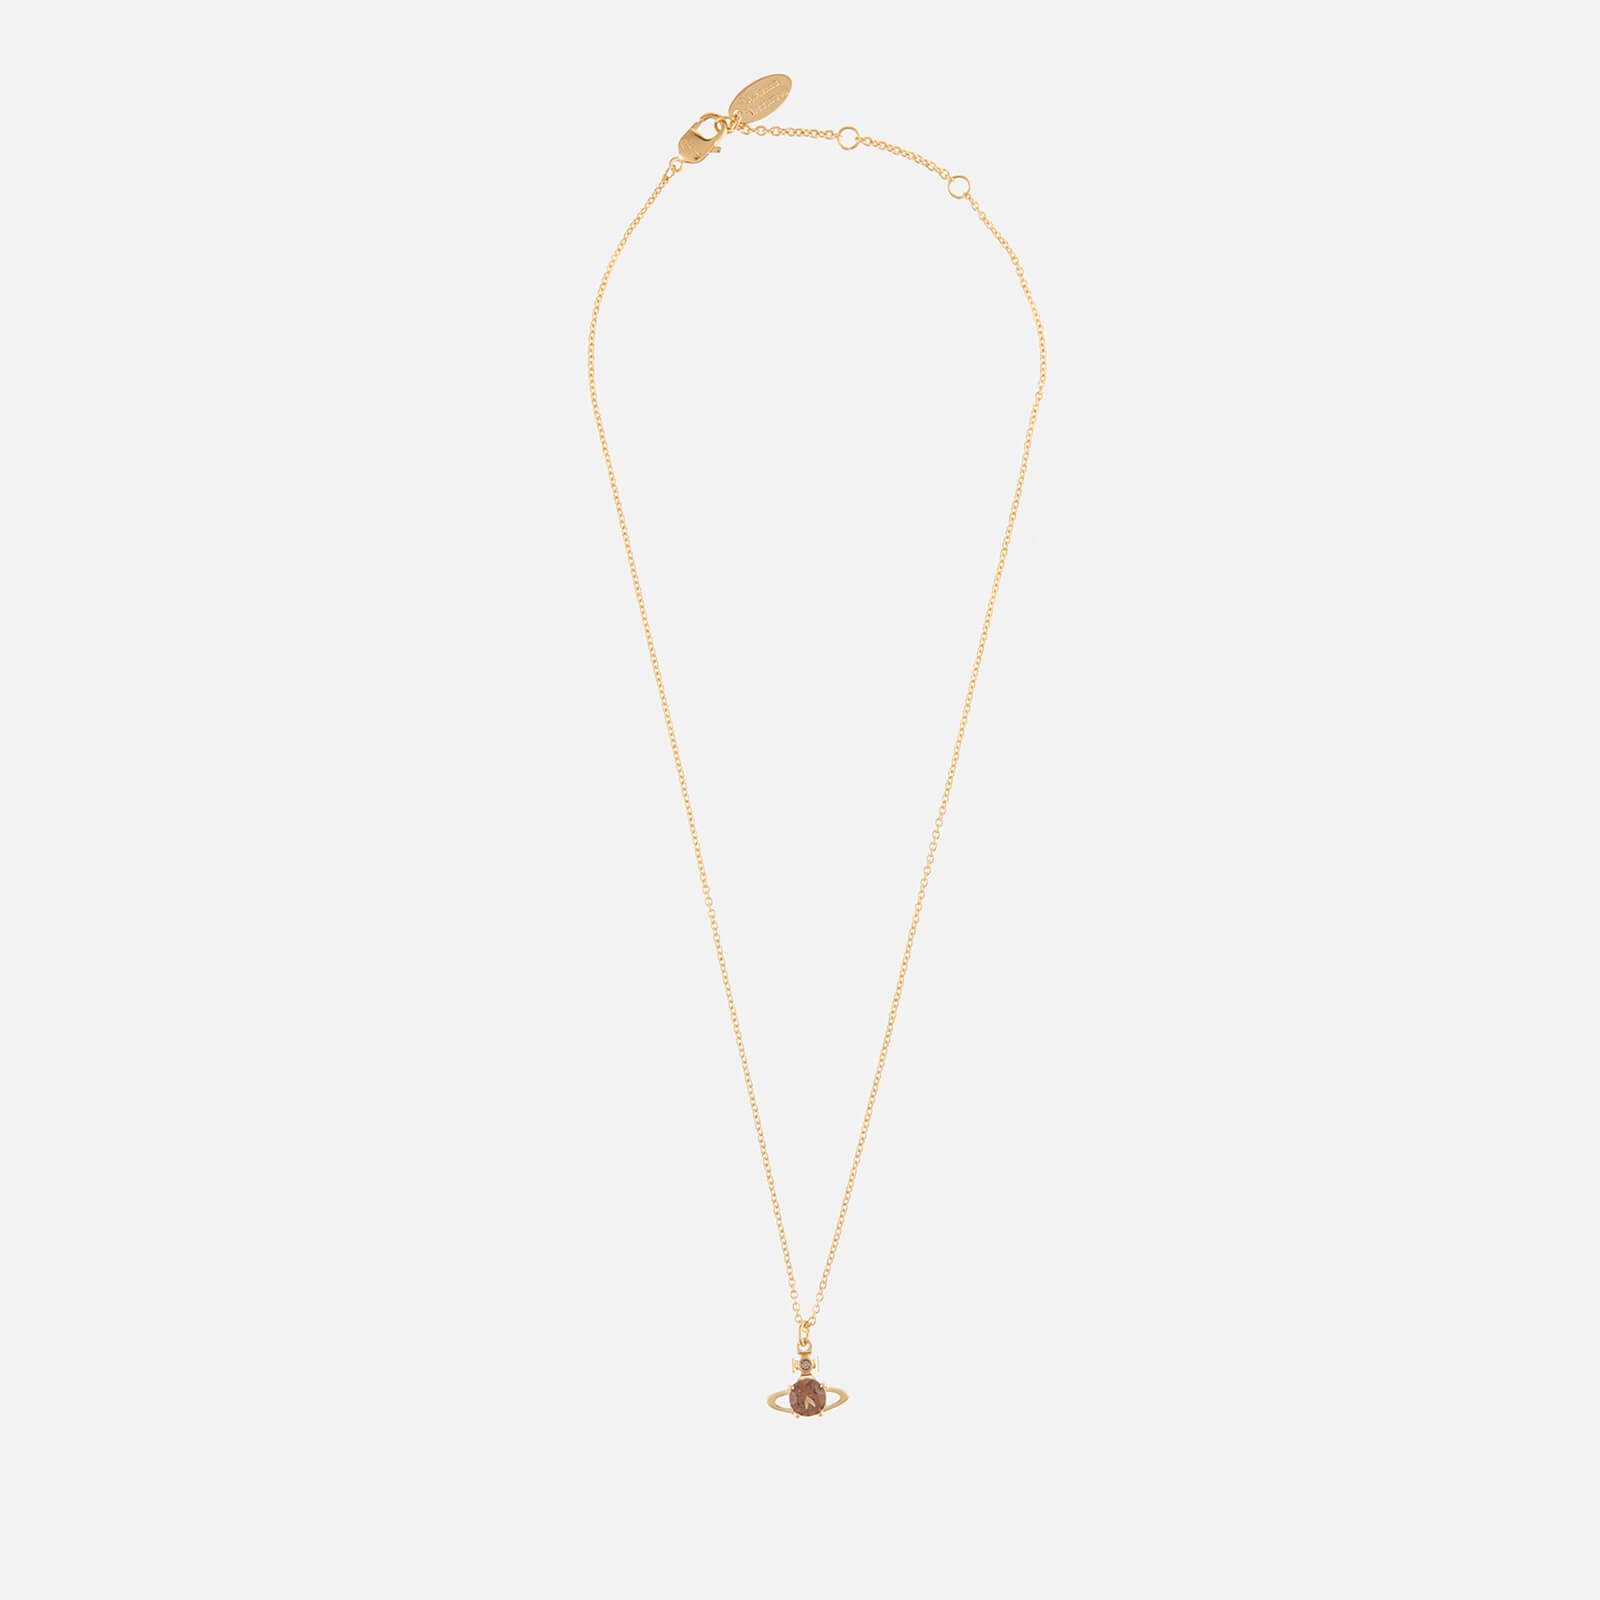 Vivienne Westwood Reina Gold-Tone and Crystal Necklace